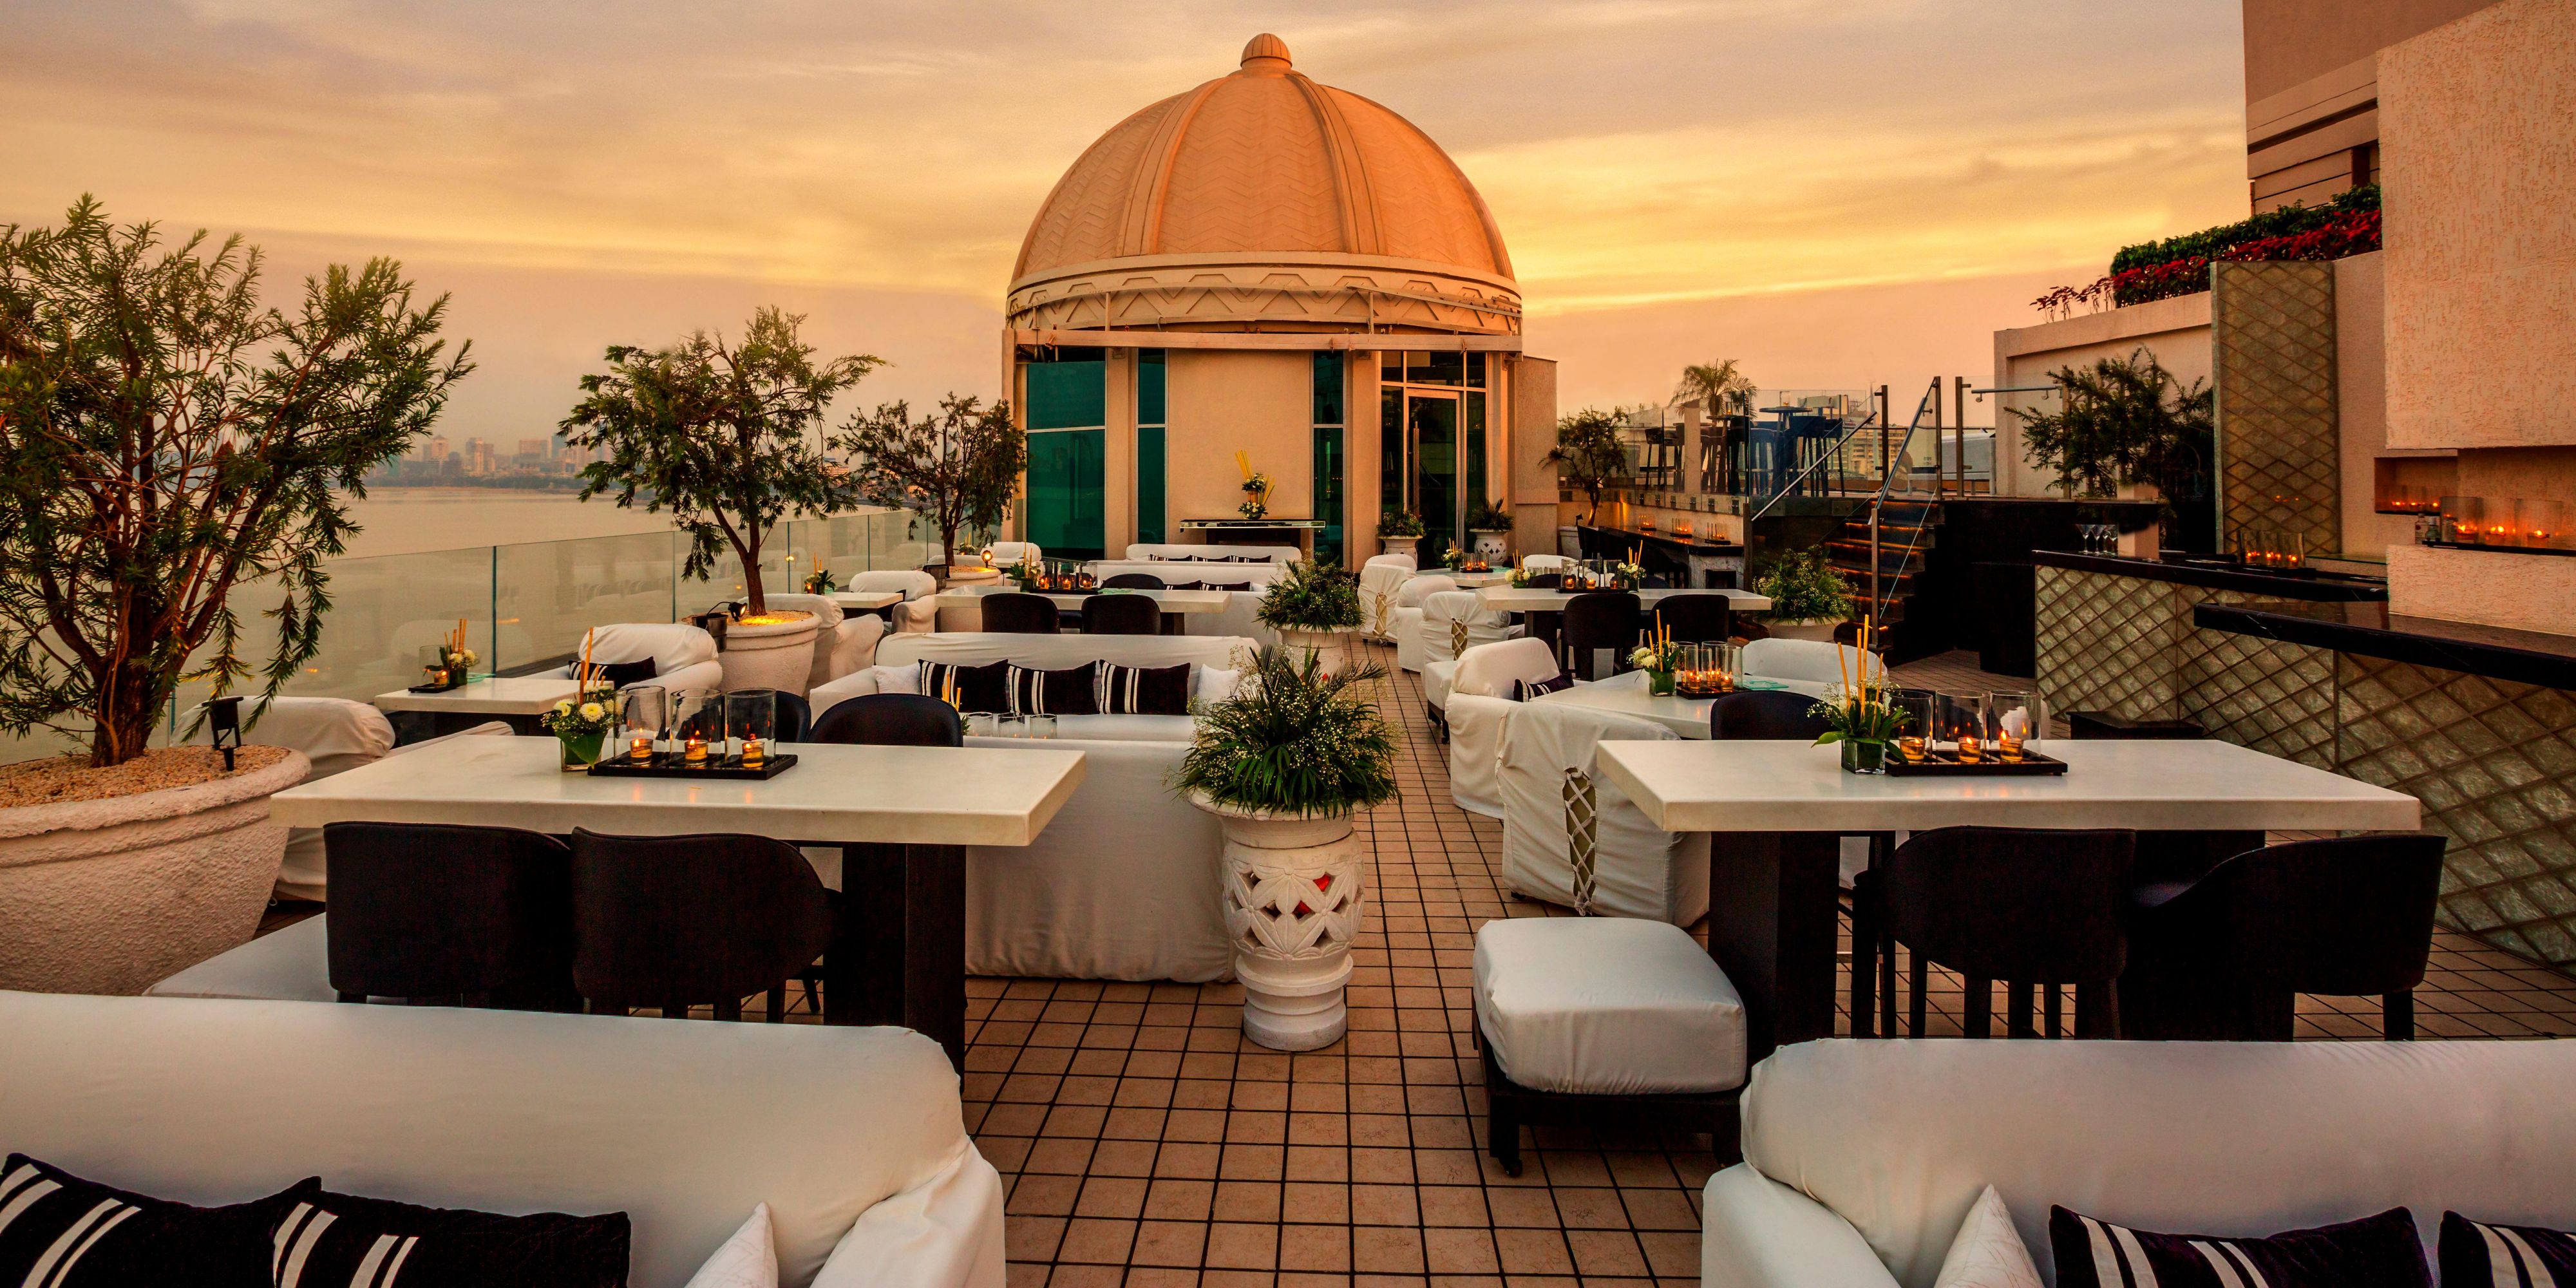 Dome, the al fresco rooftop cocktail lounge, serves an eclectic mix of small plates and cocktails with a breathtaking view of the seafront. The Dome has the distinction of being voted one of the top 10 sky bars in the world by Forbes Traveller, Times UK, and The Telegraph to name a few, and is undoubtedly Mumbai’s most sought-after rooftop bar.